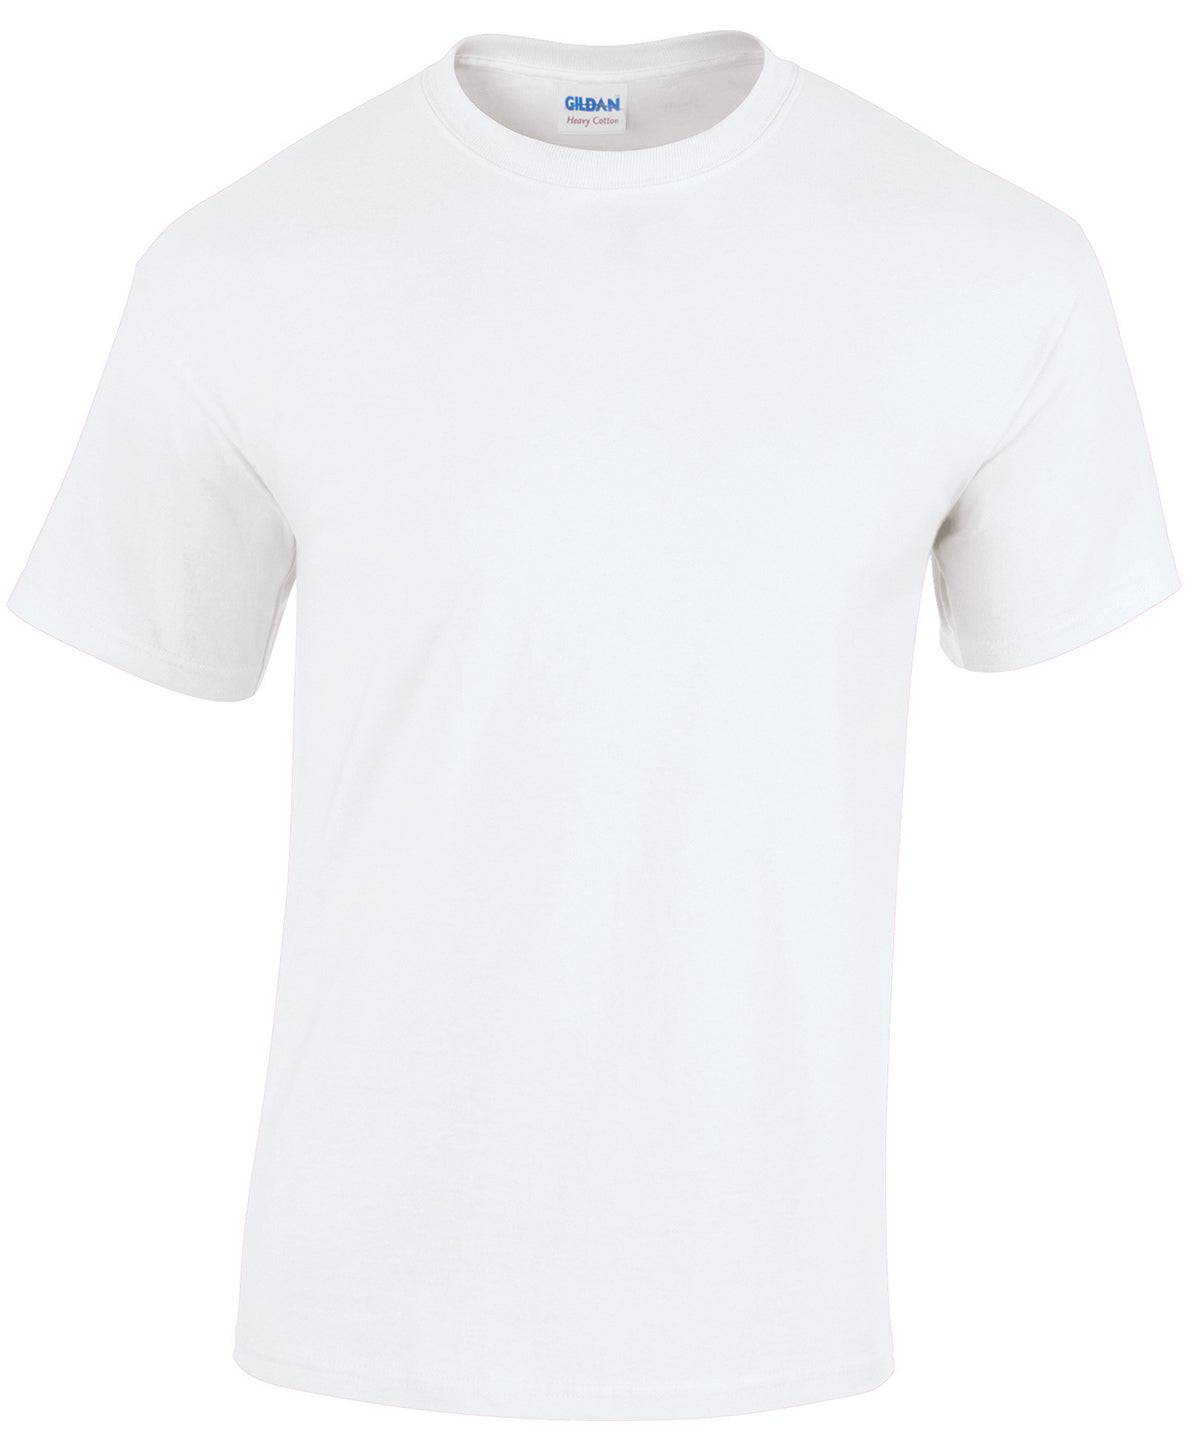 White - Heavy Cotton™ youth t-shirt